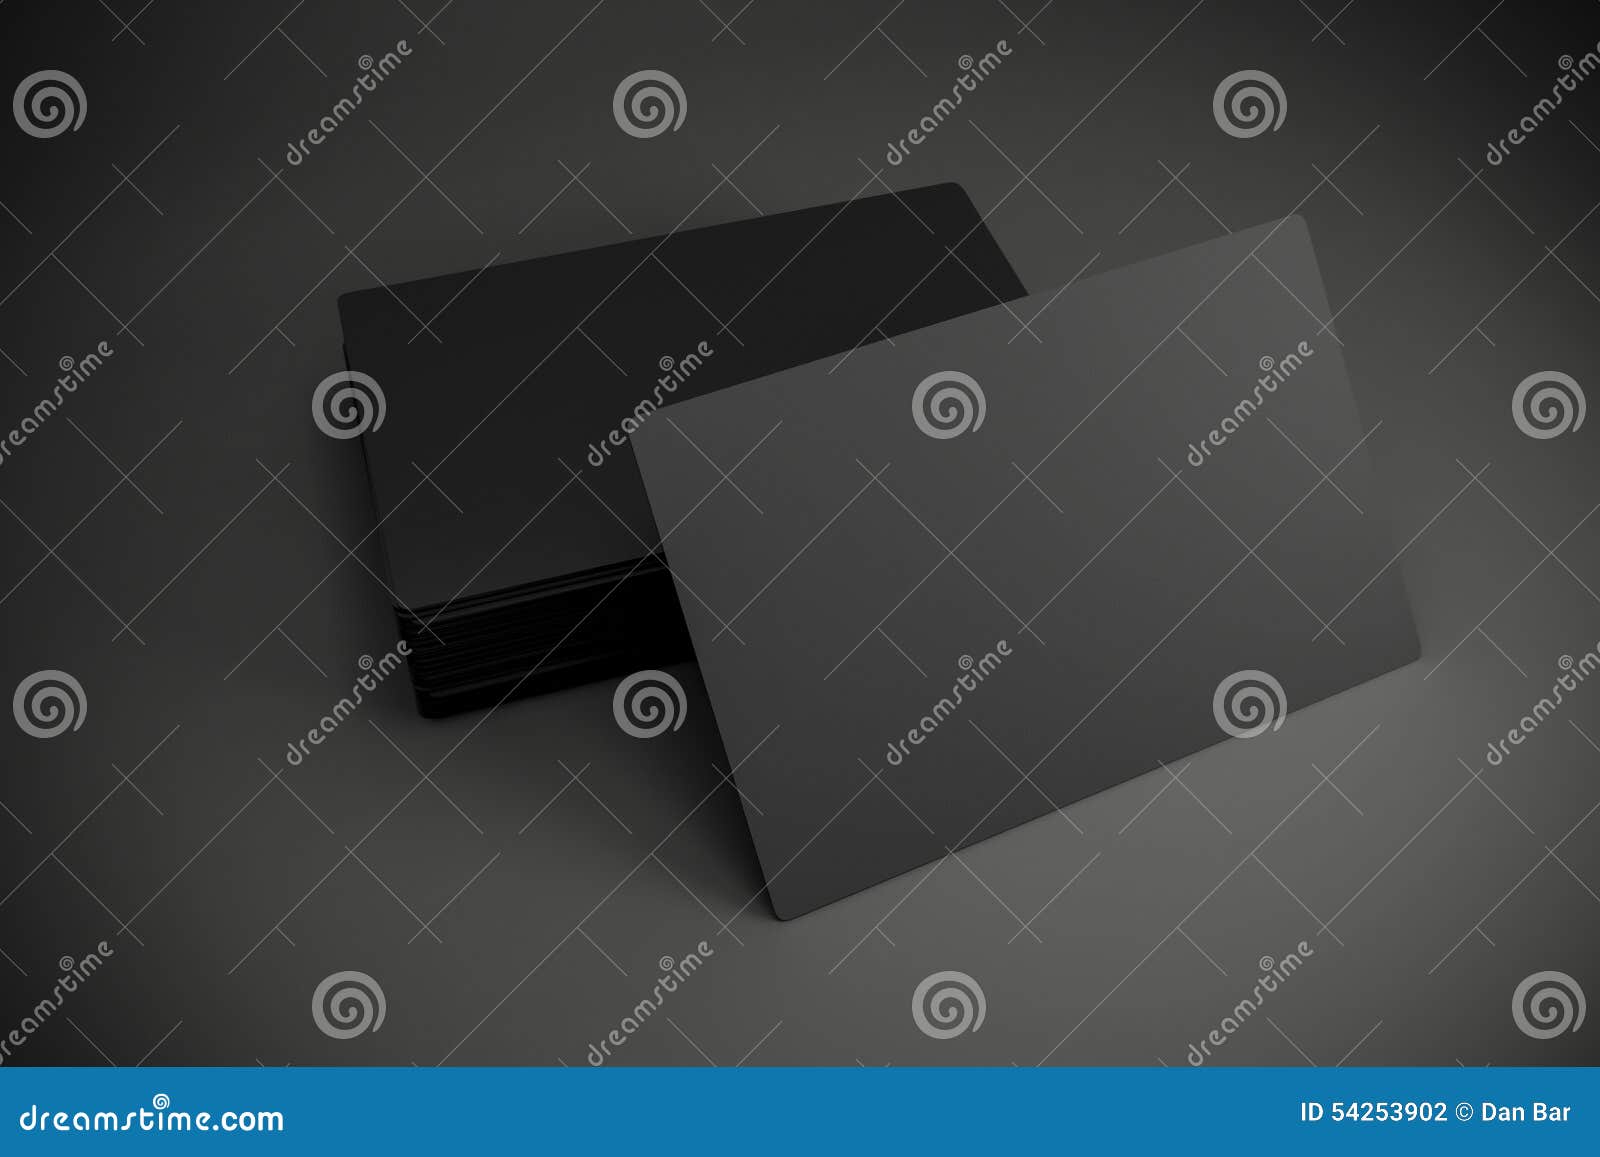 blank black business cards 4